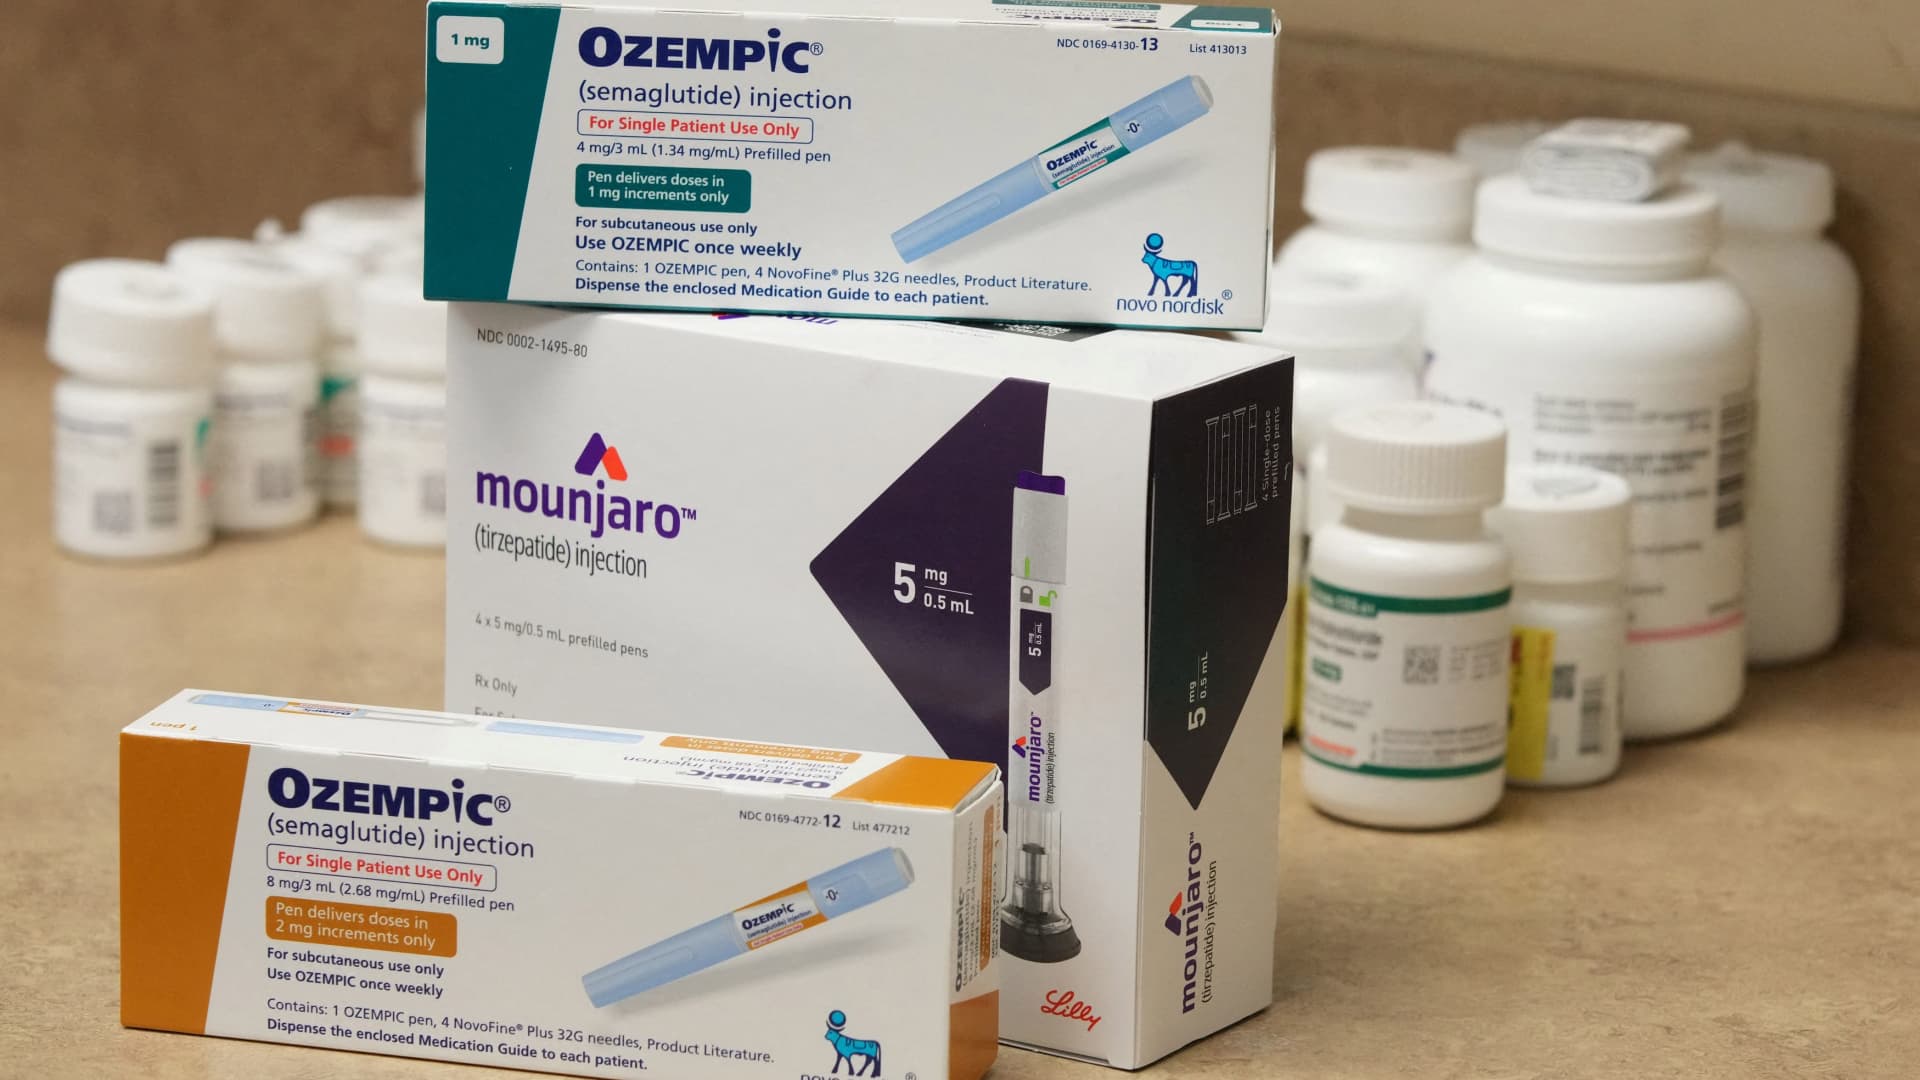 Mounjaro is more effective than Ozempic for weight loss in overweight and obese adults, real-world study says